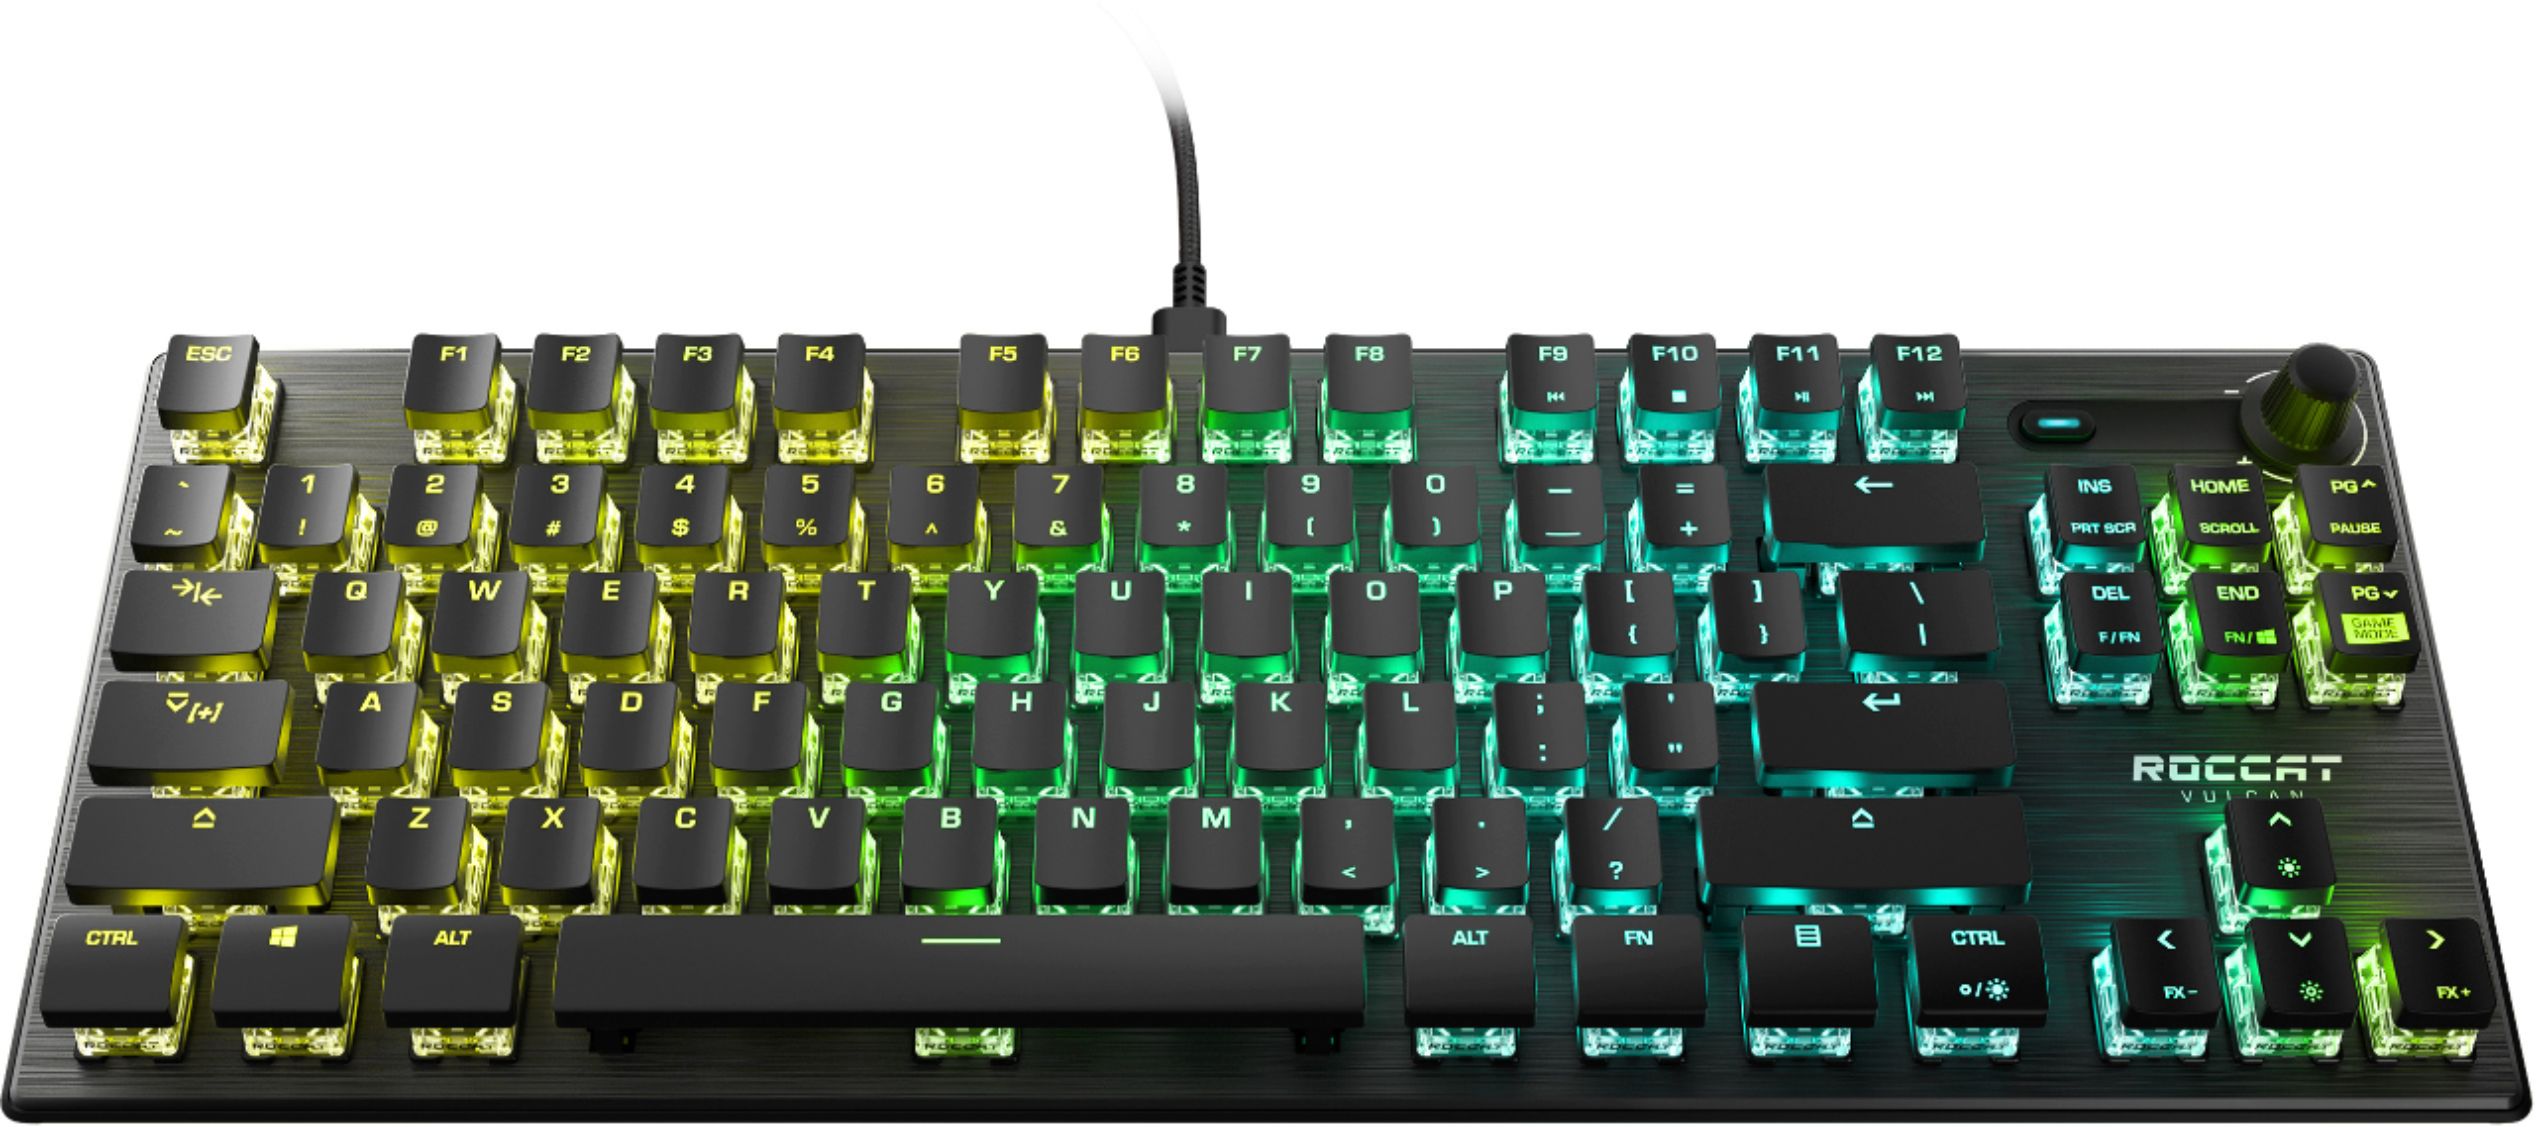 ROCCAT - Vulcan TKL Pro Compact PC Gaming Keyboard with Linear Optical Titan Switch, AIMO RGB Lighting and Detachable USB-C Cable - Black